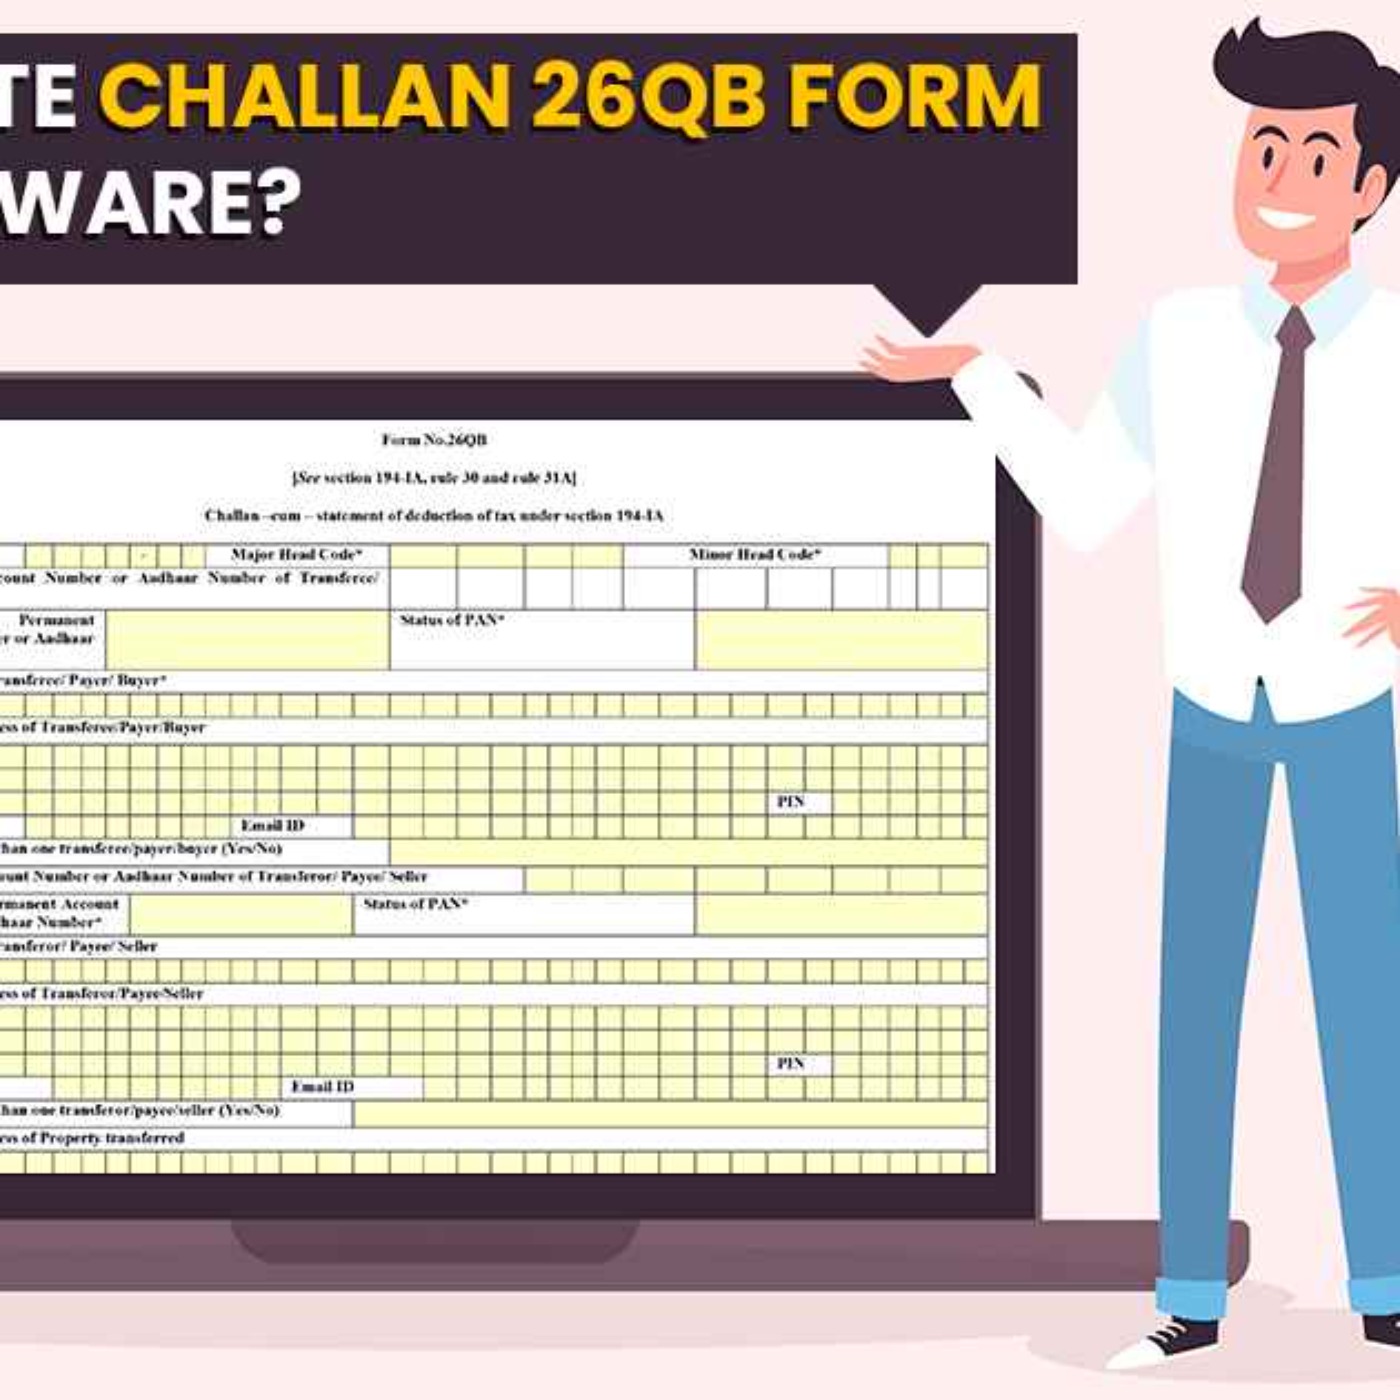 how-to-generate-payment-challan-26qb-form-by-gen-e-tds-software-tax